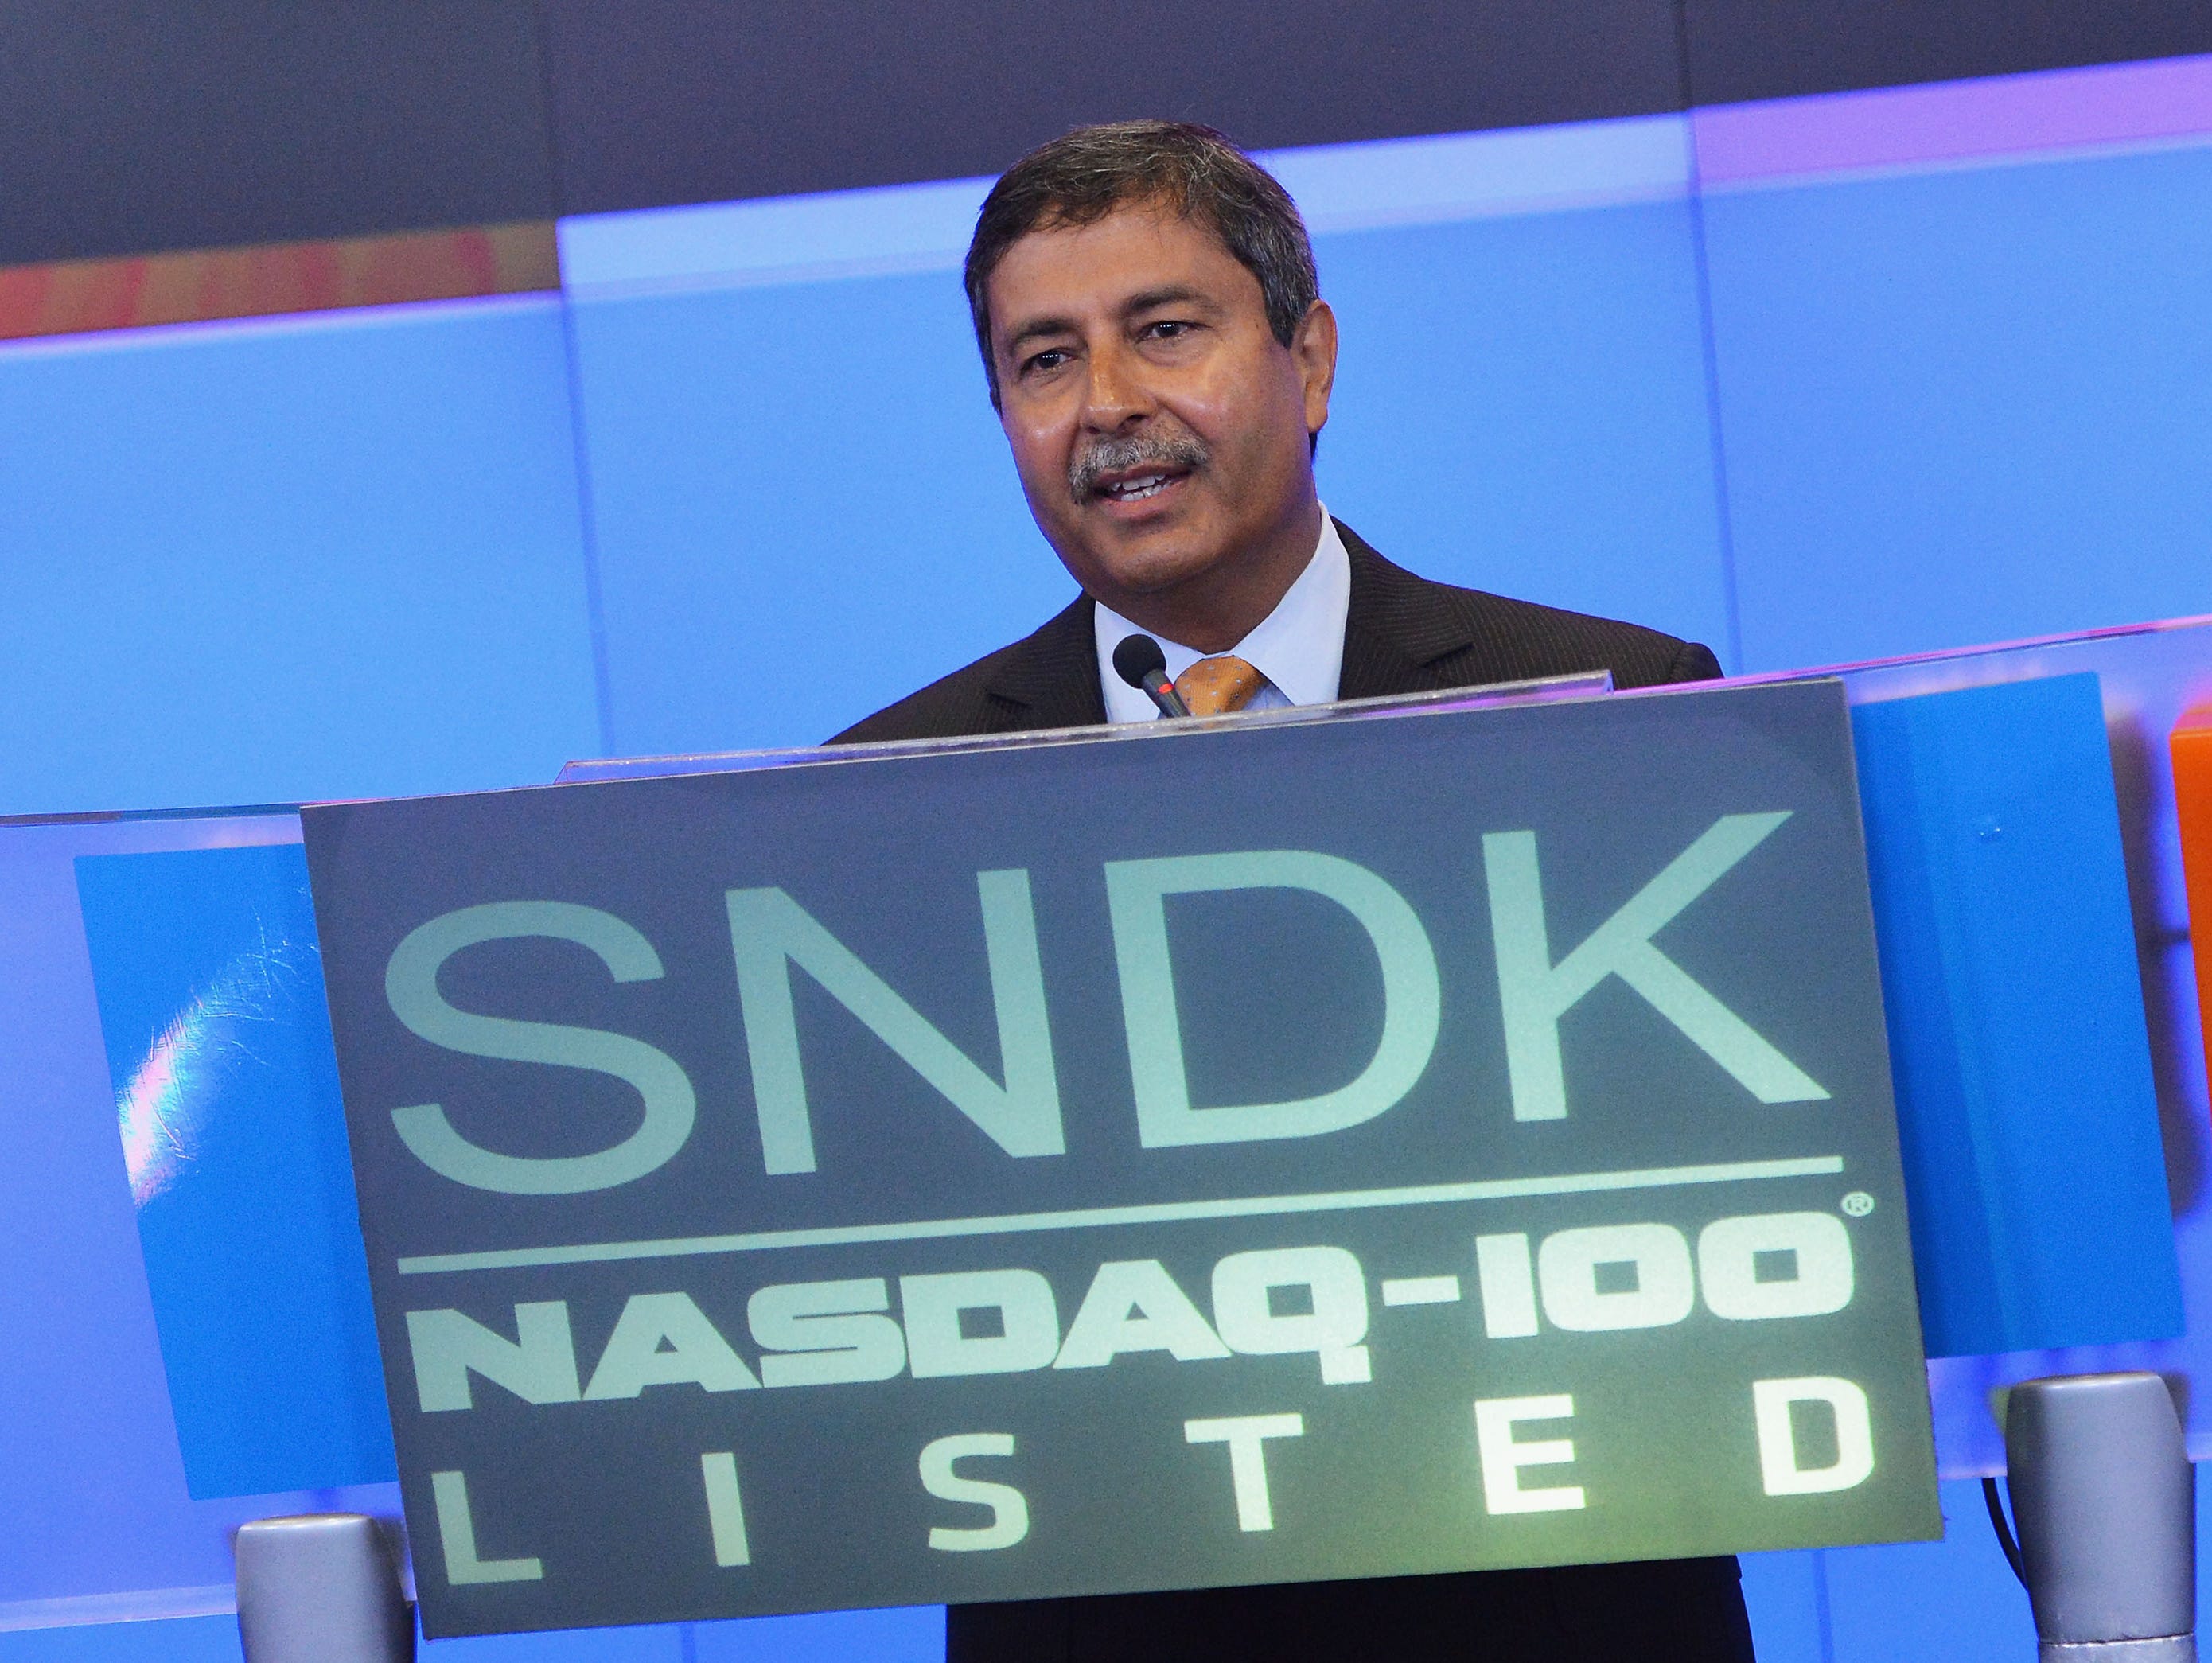 Sanjay Mehrotra, President, Chief Executive Officer and Co-Founder of SanDisk Corporation, rings the Opening Bell at the Nasdaq MarketSite in 2013.